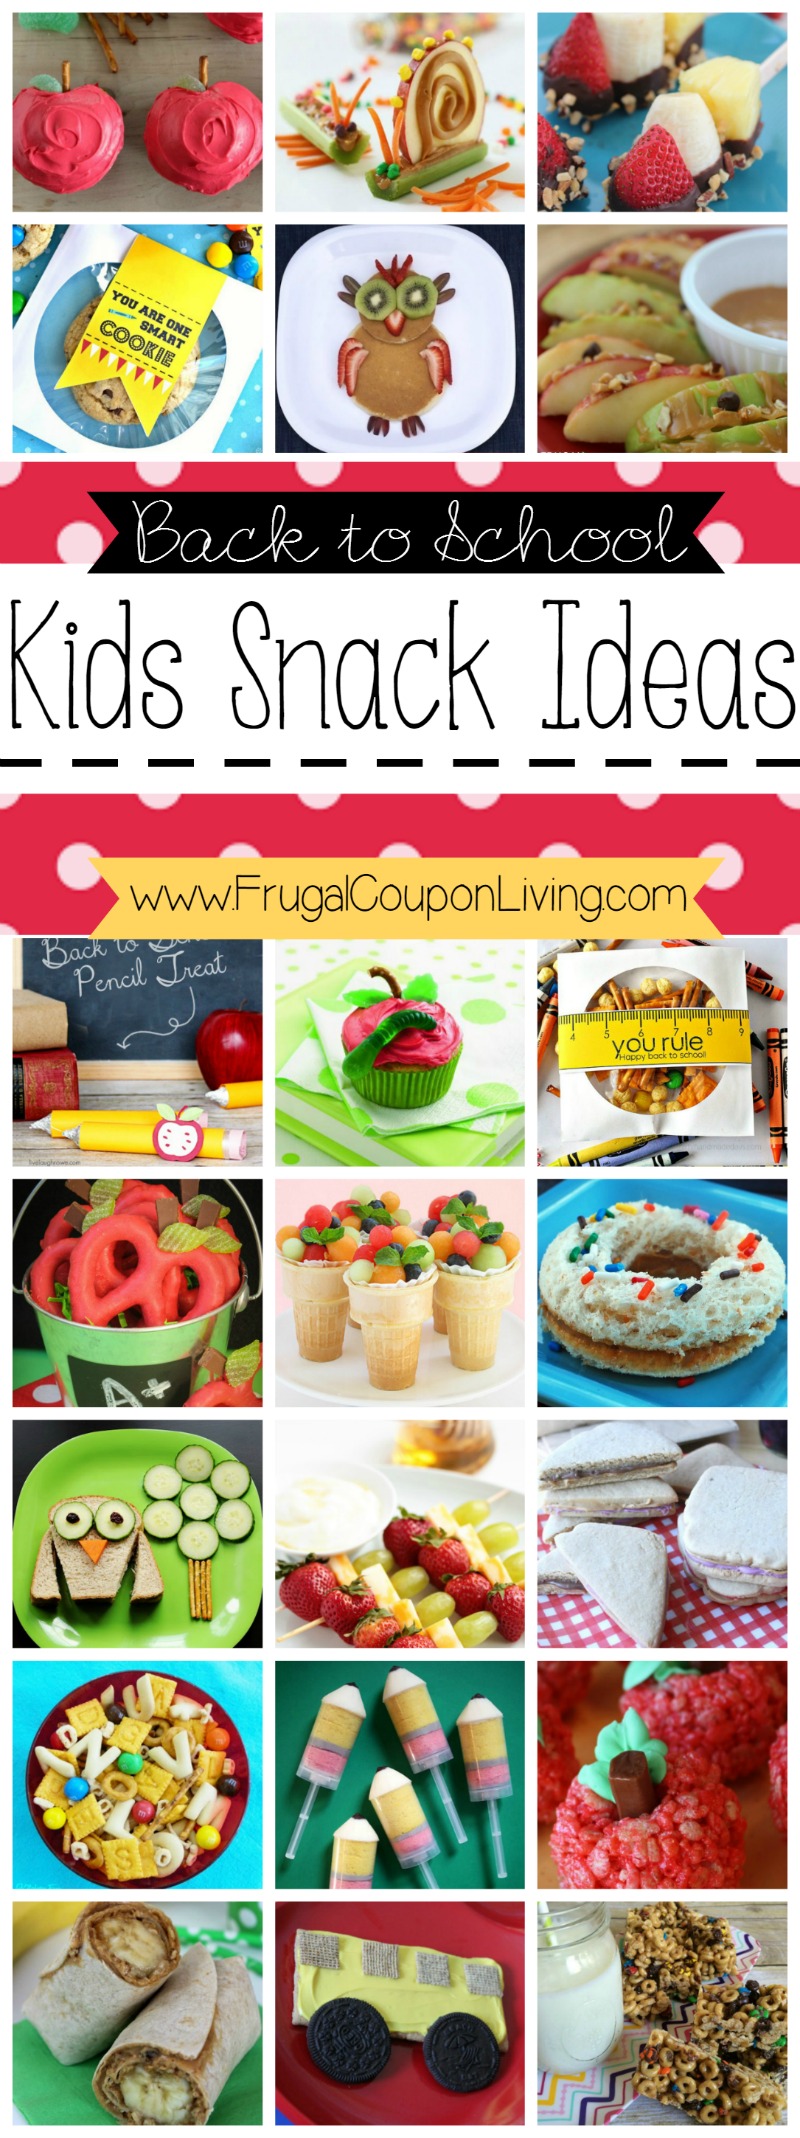 first-day-of-school-back-to-school-kids-snack-ideas-frugal-coupon-living